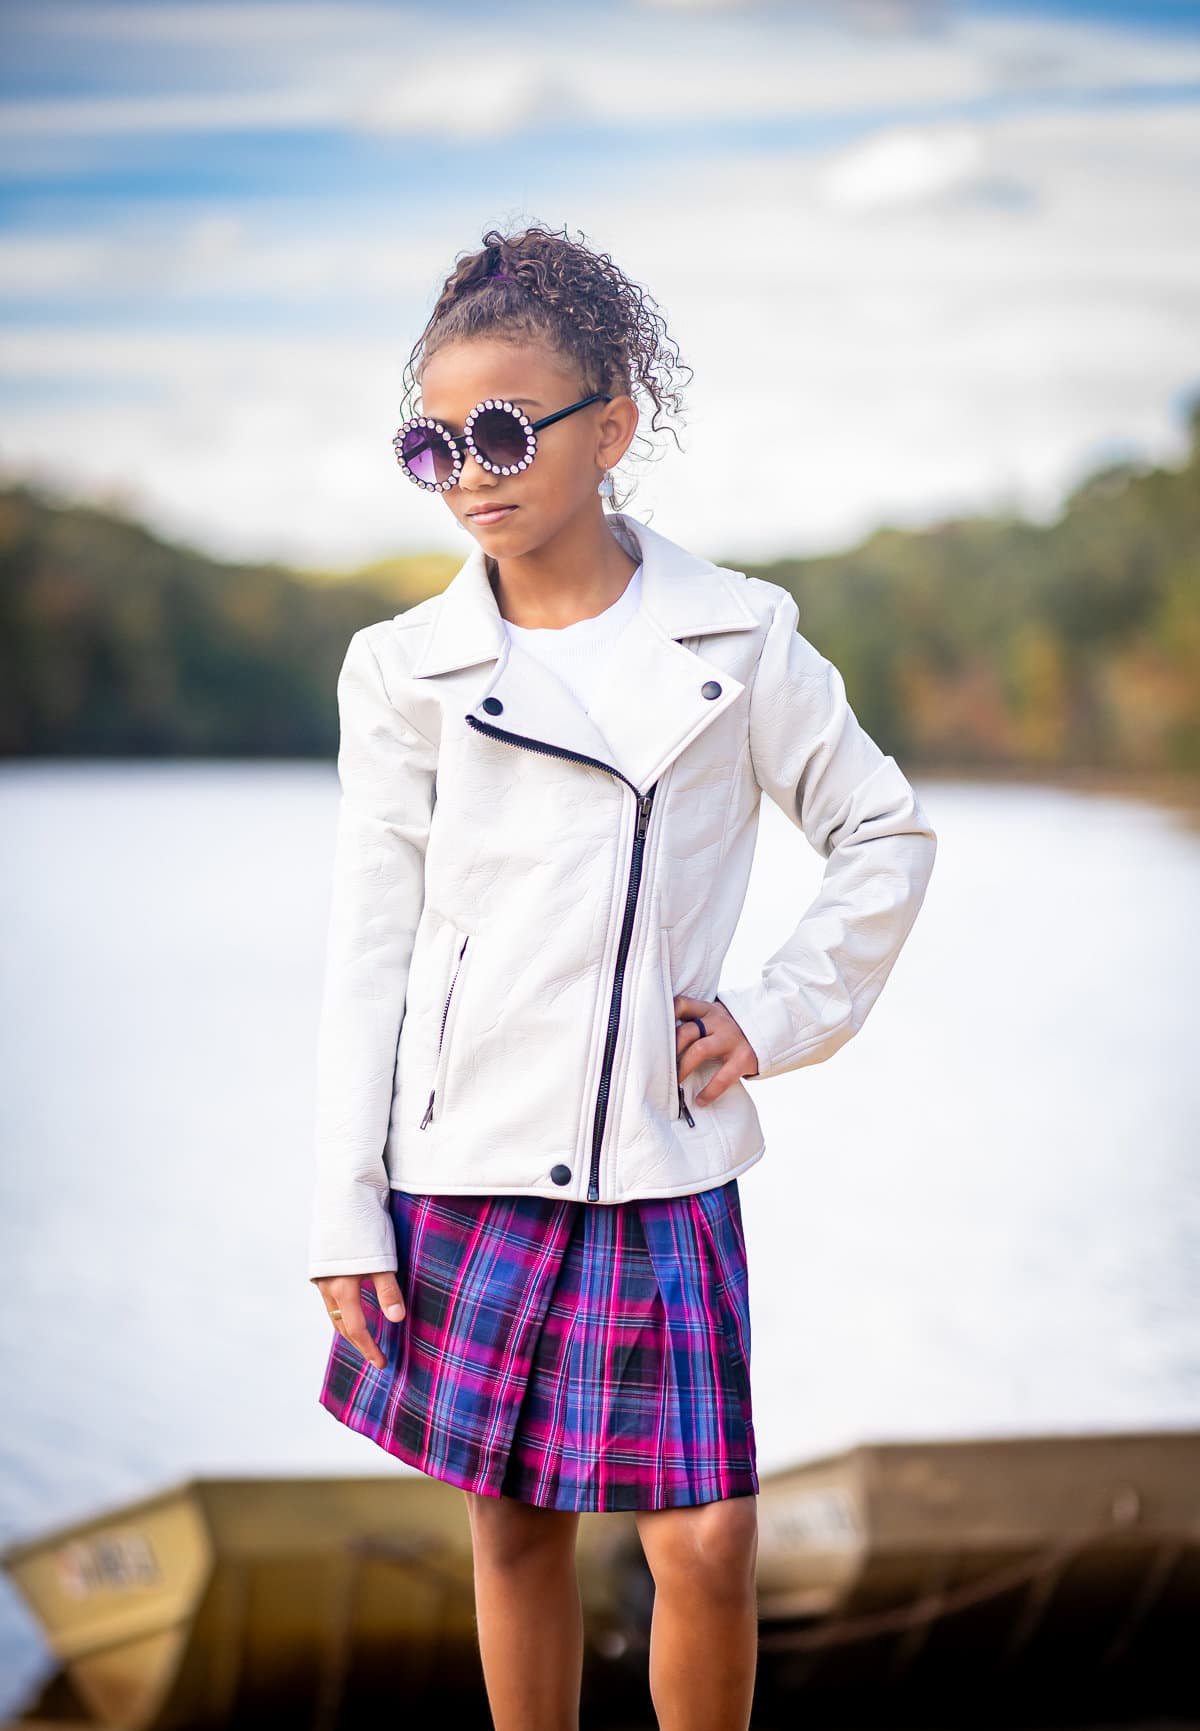 21 Of The Coolest Winter Fashion Outfit Ideas This Season 56 Daily Mom, Magazine For Families